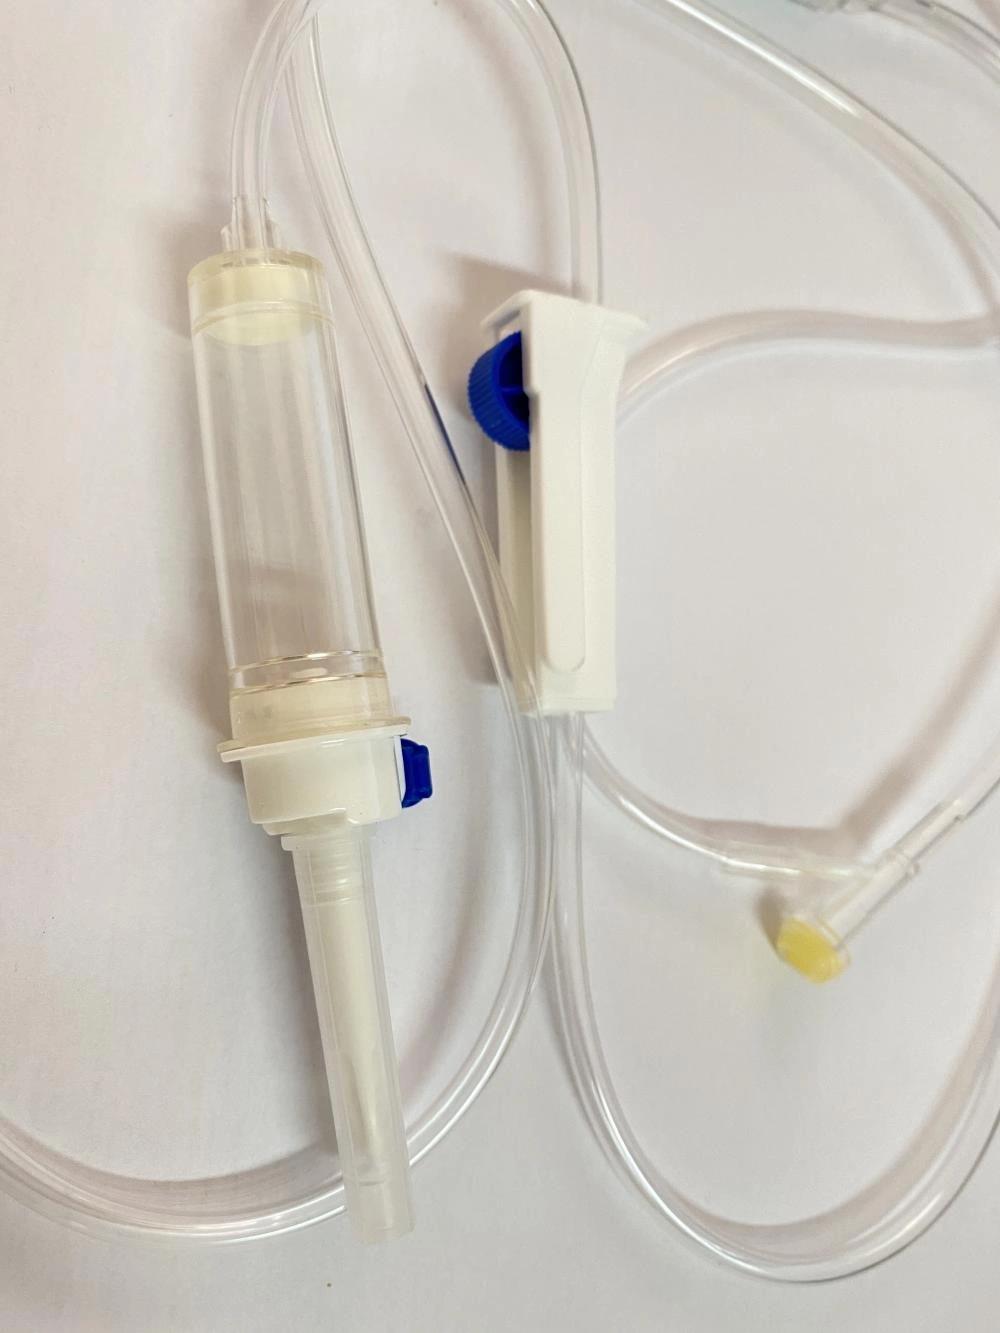 Infusion Iv Set With Blowing-model Drip Chamber